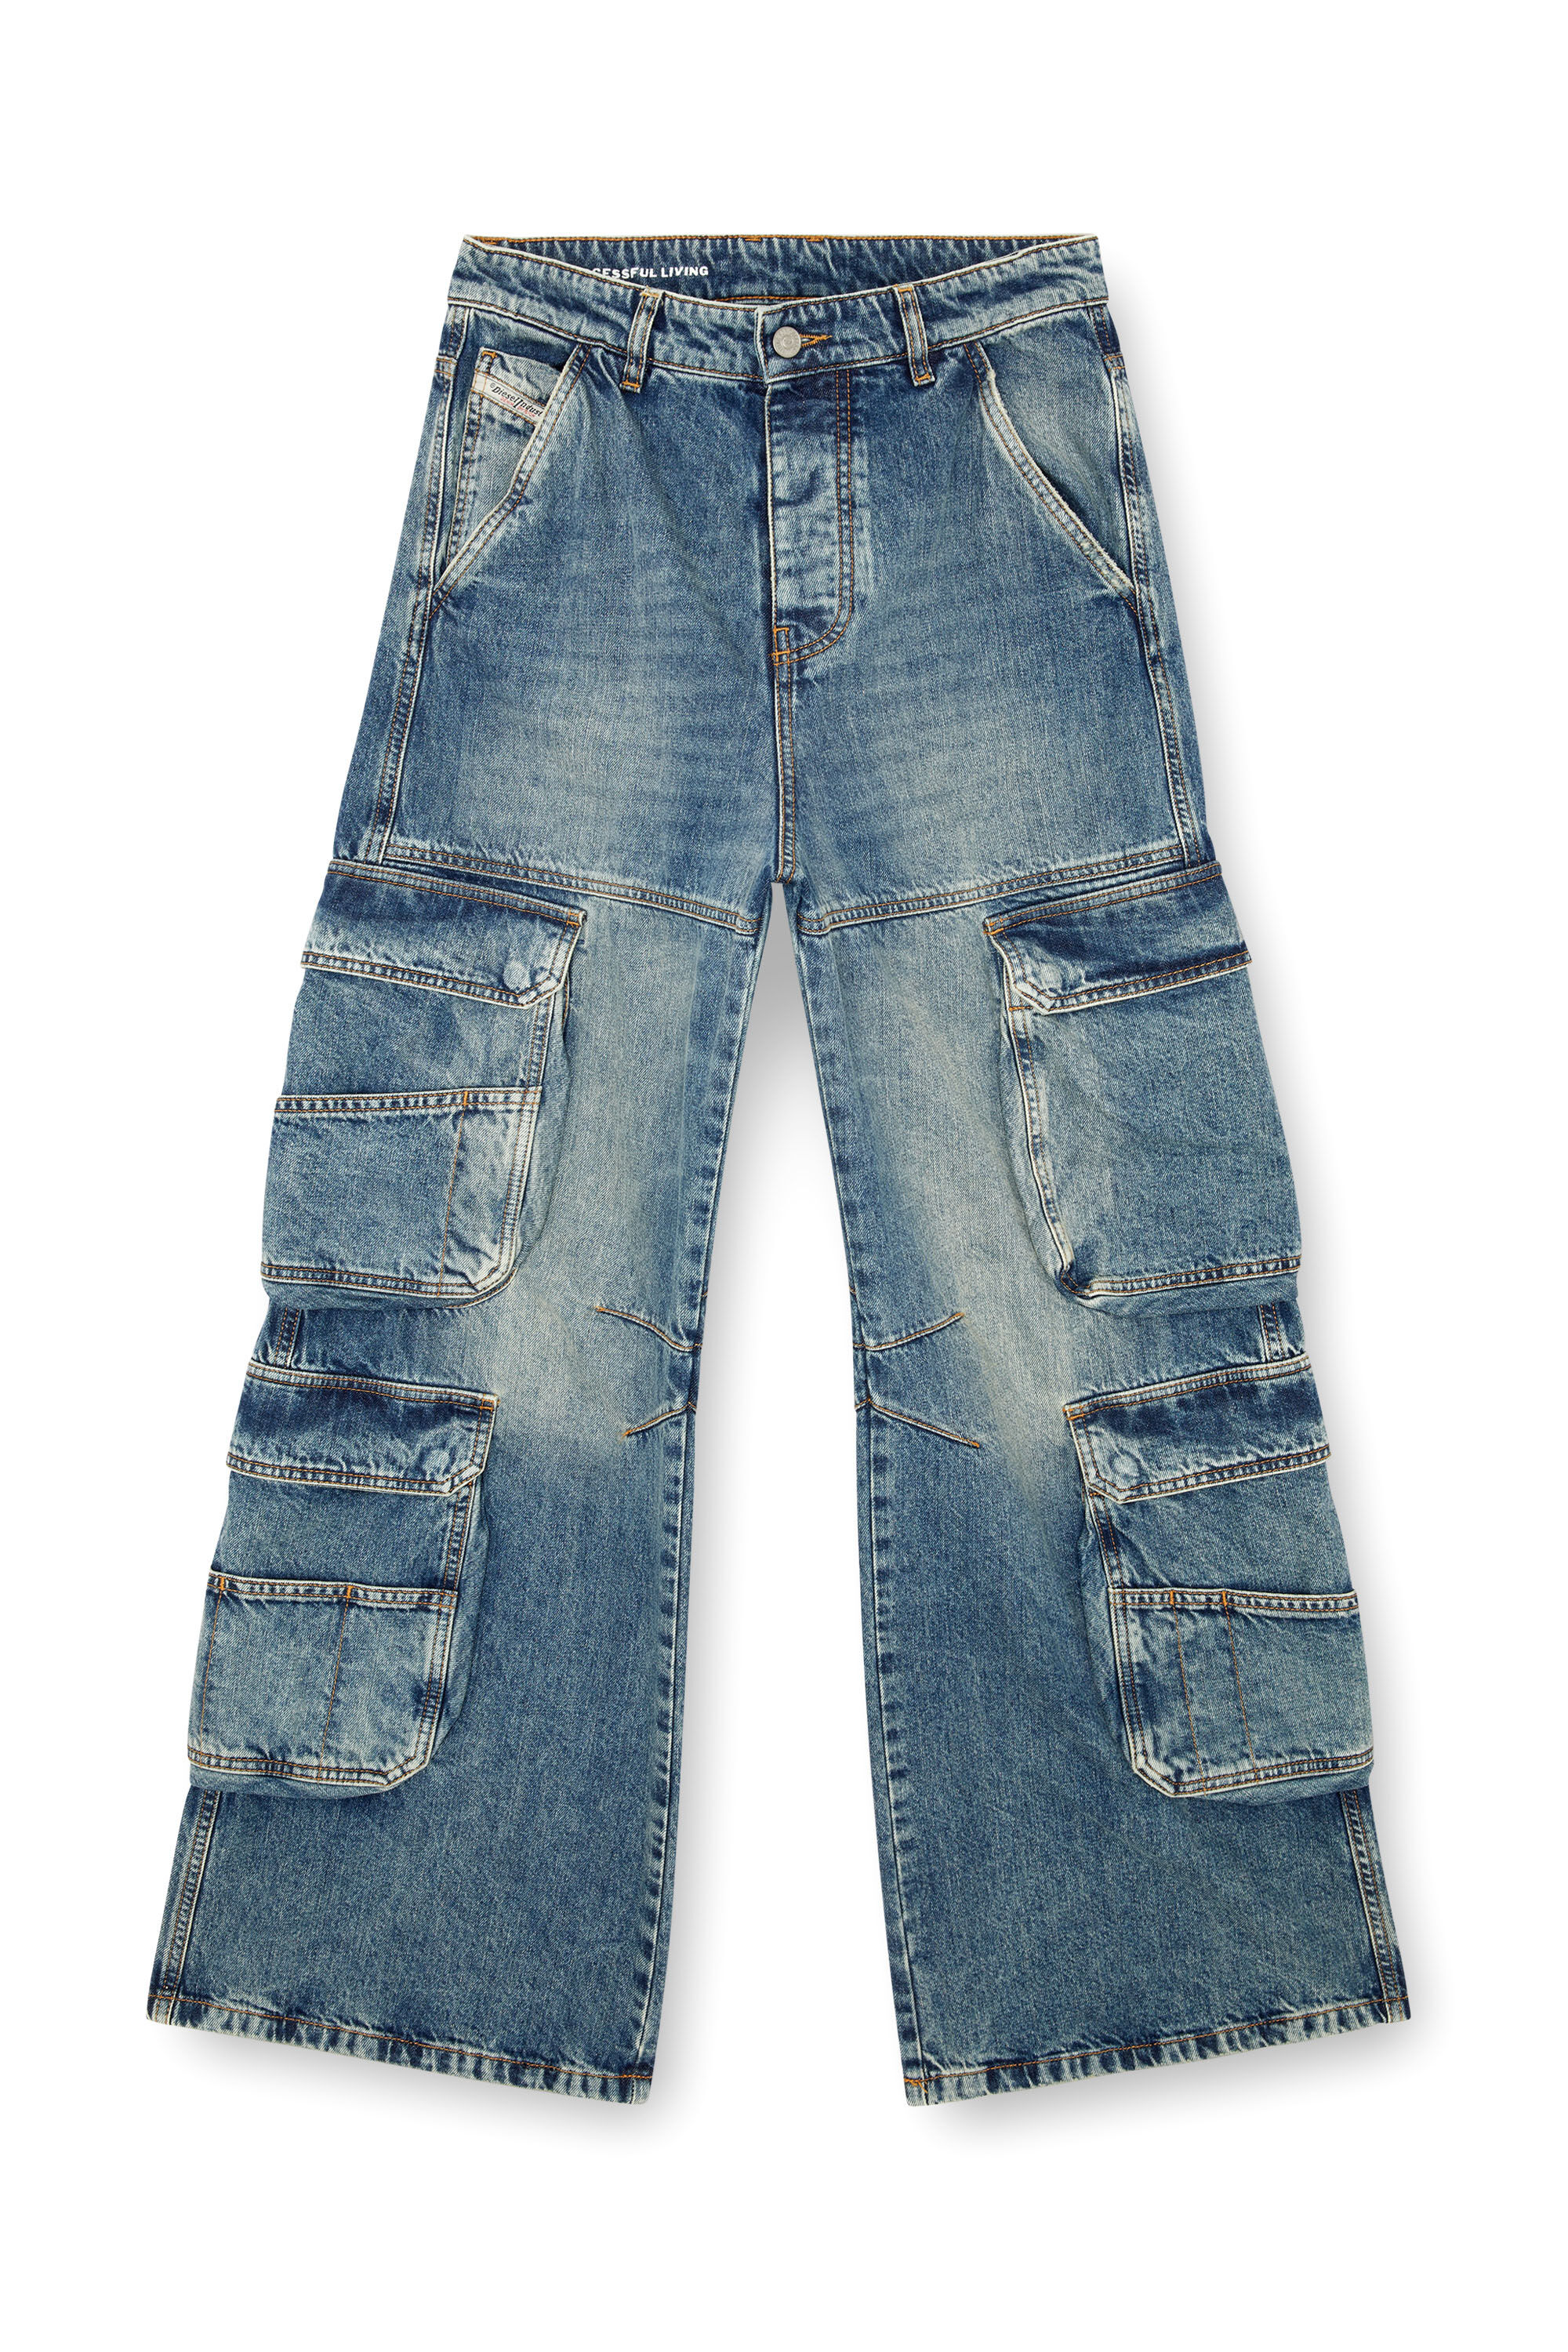 Diesel - Straight Jeans 1996 D-Sire 0NLAX, Mujer Straight Jeans - 1996 D-Sire in Azul marino - Image 2